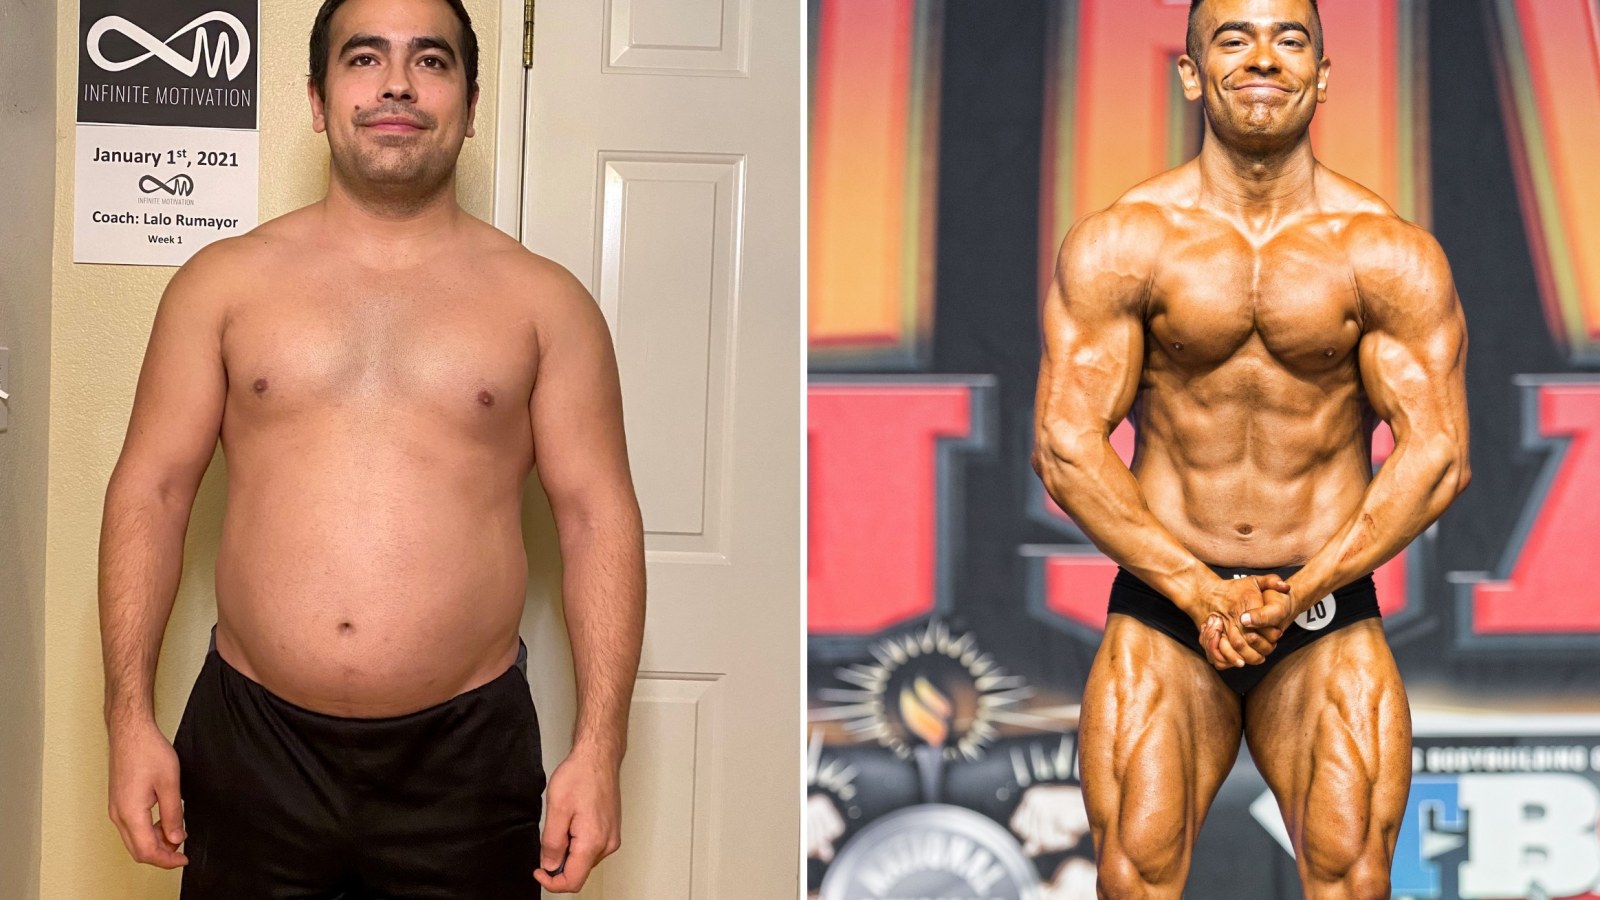 I Went From Overweight To Shredded in a Year—Here's How